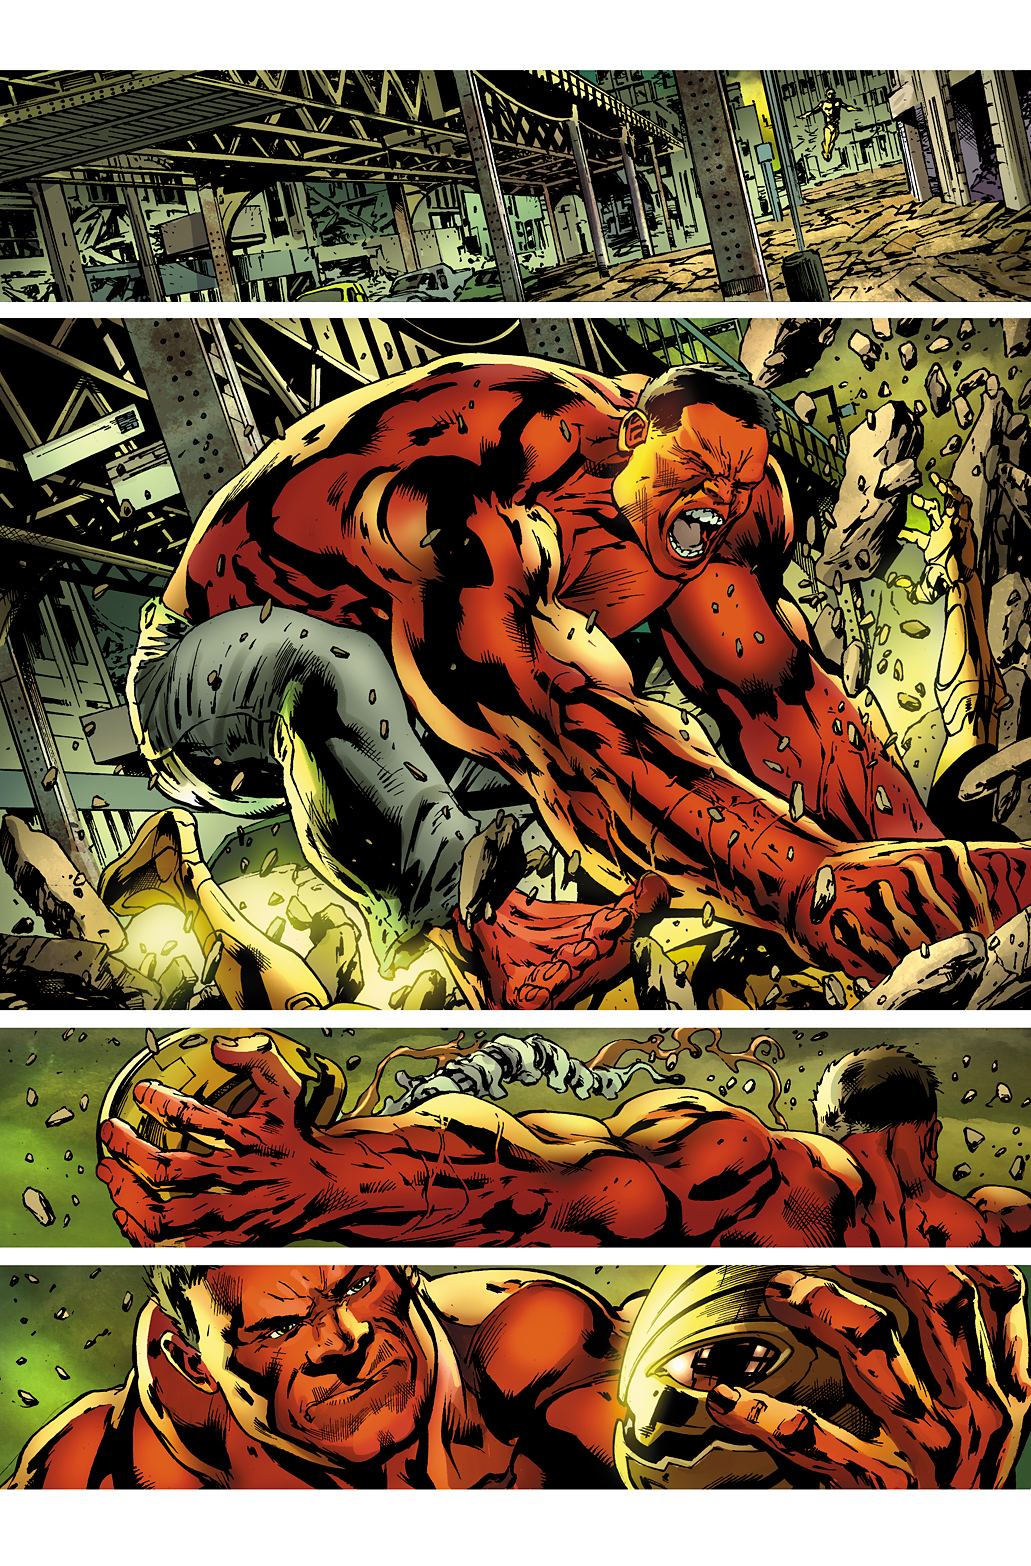 AGE OF ULTRON #3 Preview 3 - art by Bryan Hitch